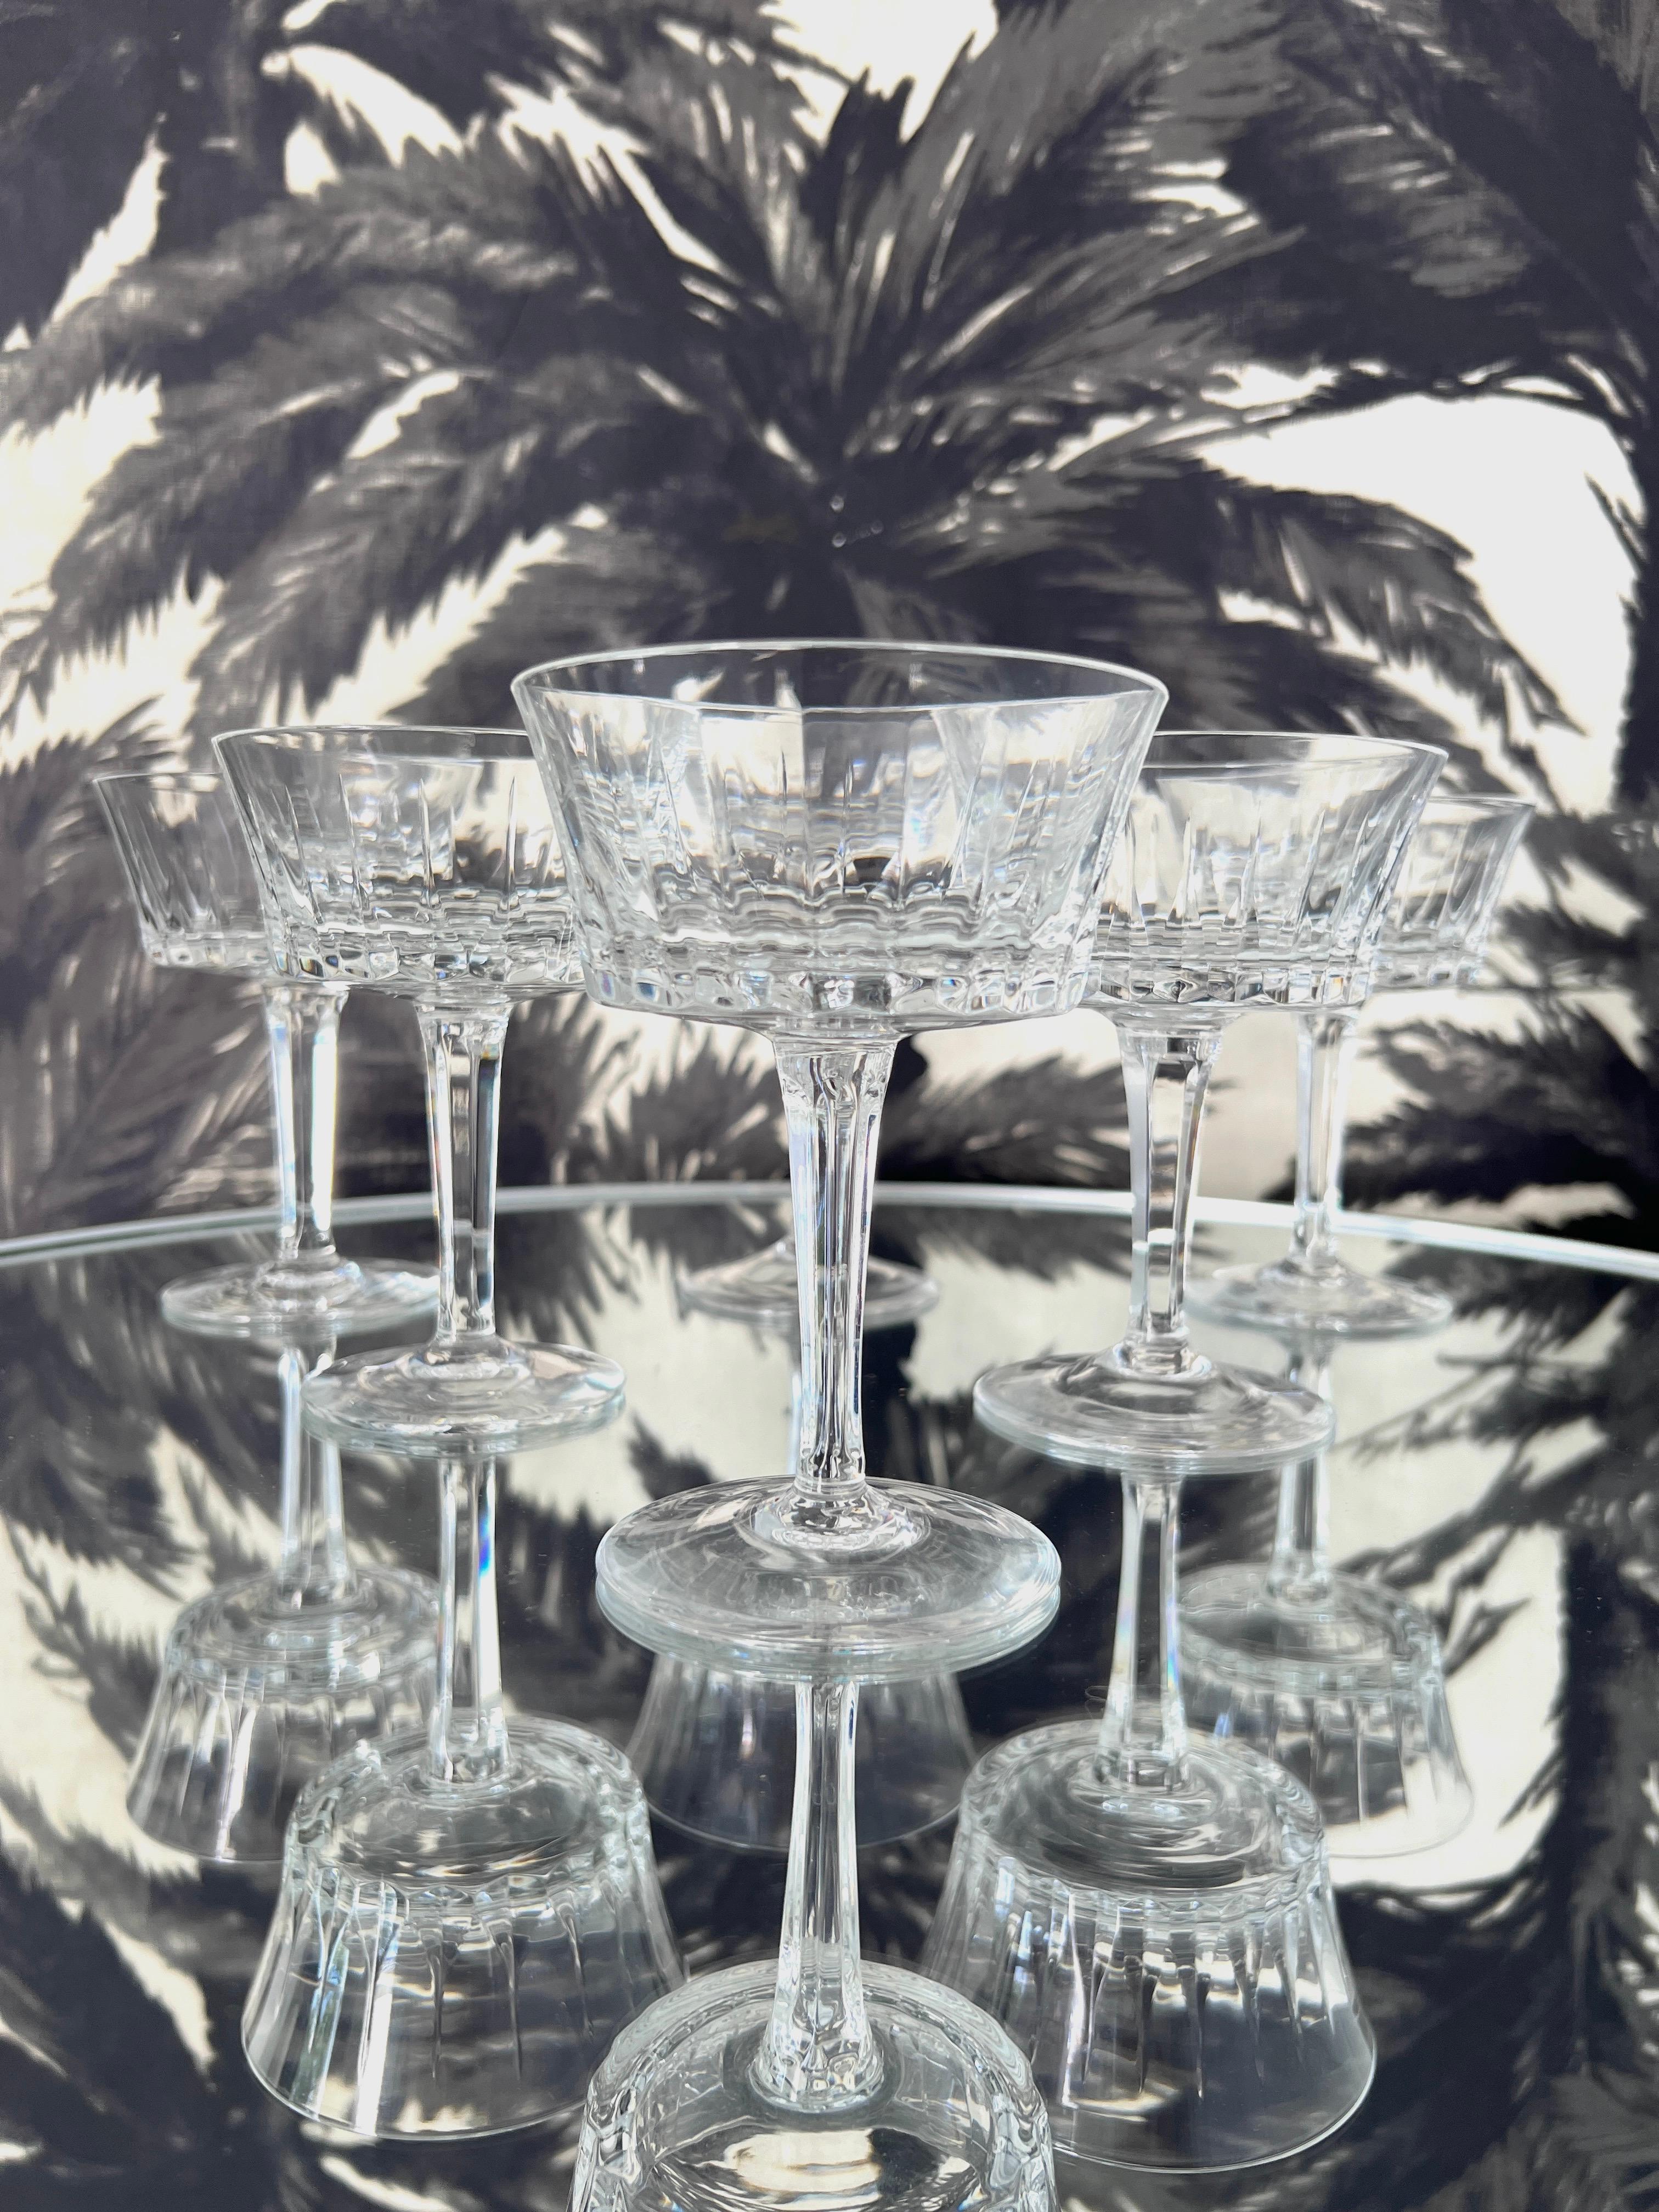 Set of vintage crystal stemware by Gorham, c. 1970. The elegant blown glass champagne coupes feature etched vertical cuts along the bowls and have faceted multi-sided stems which reflect like prisms. The glasses have a beautiful weight to them and